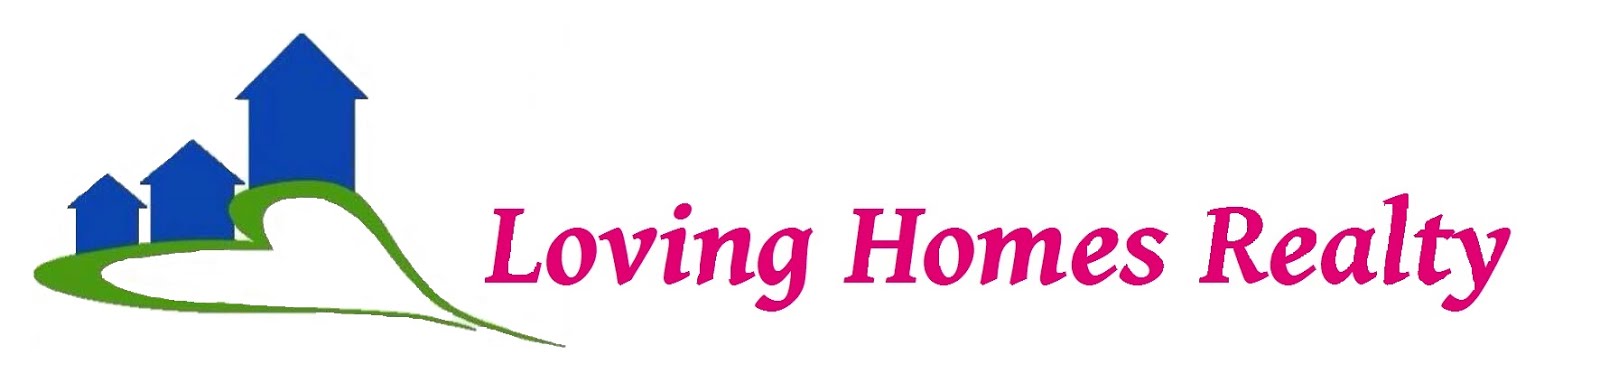 Installment Homes by Loving Homes Realty